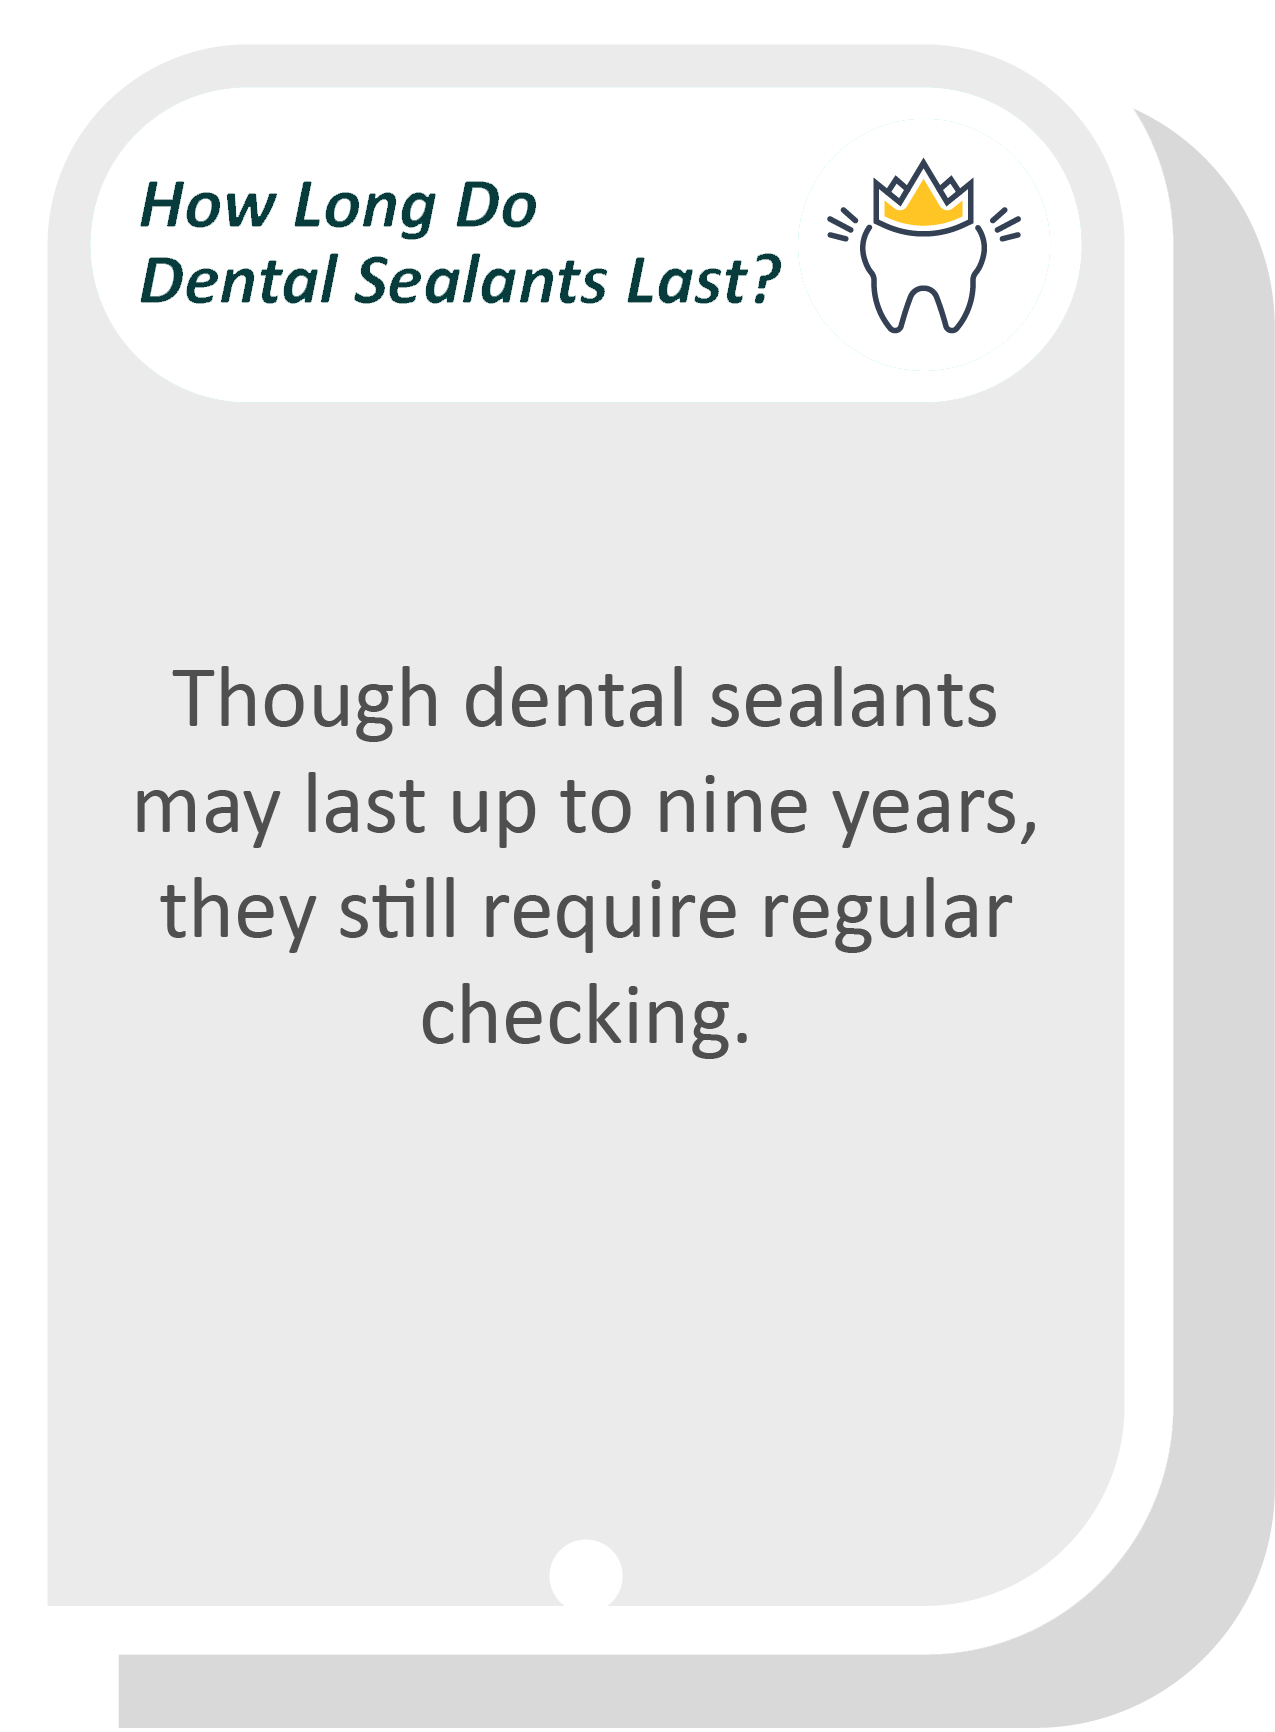 Dental sealants infographic: Though dental sealants may last up to nine years, they still require regular checking.